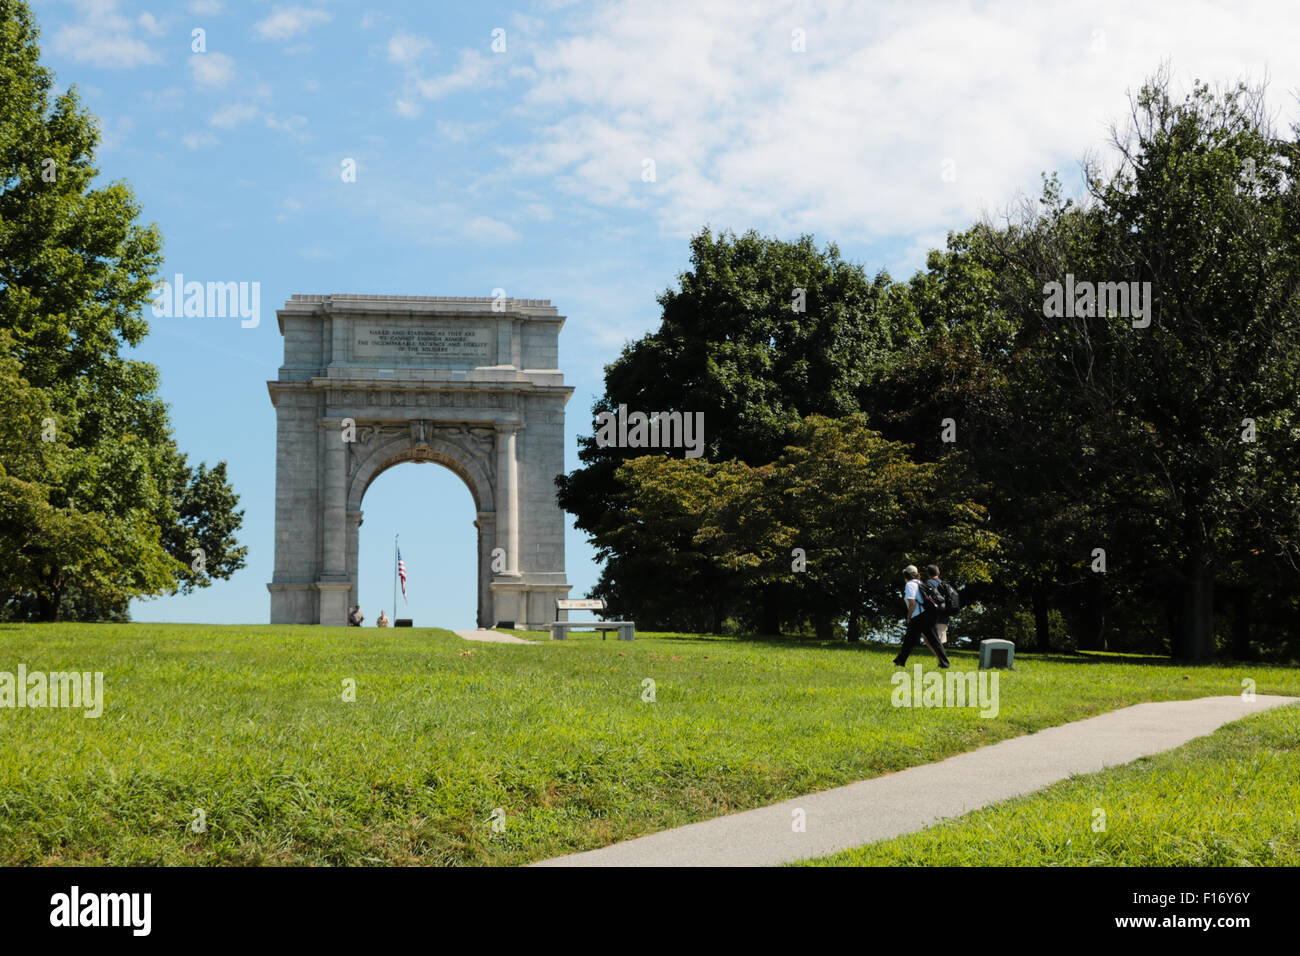 National Memorial Arch, Valley Forge, PA Banque D'Images